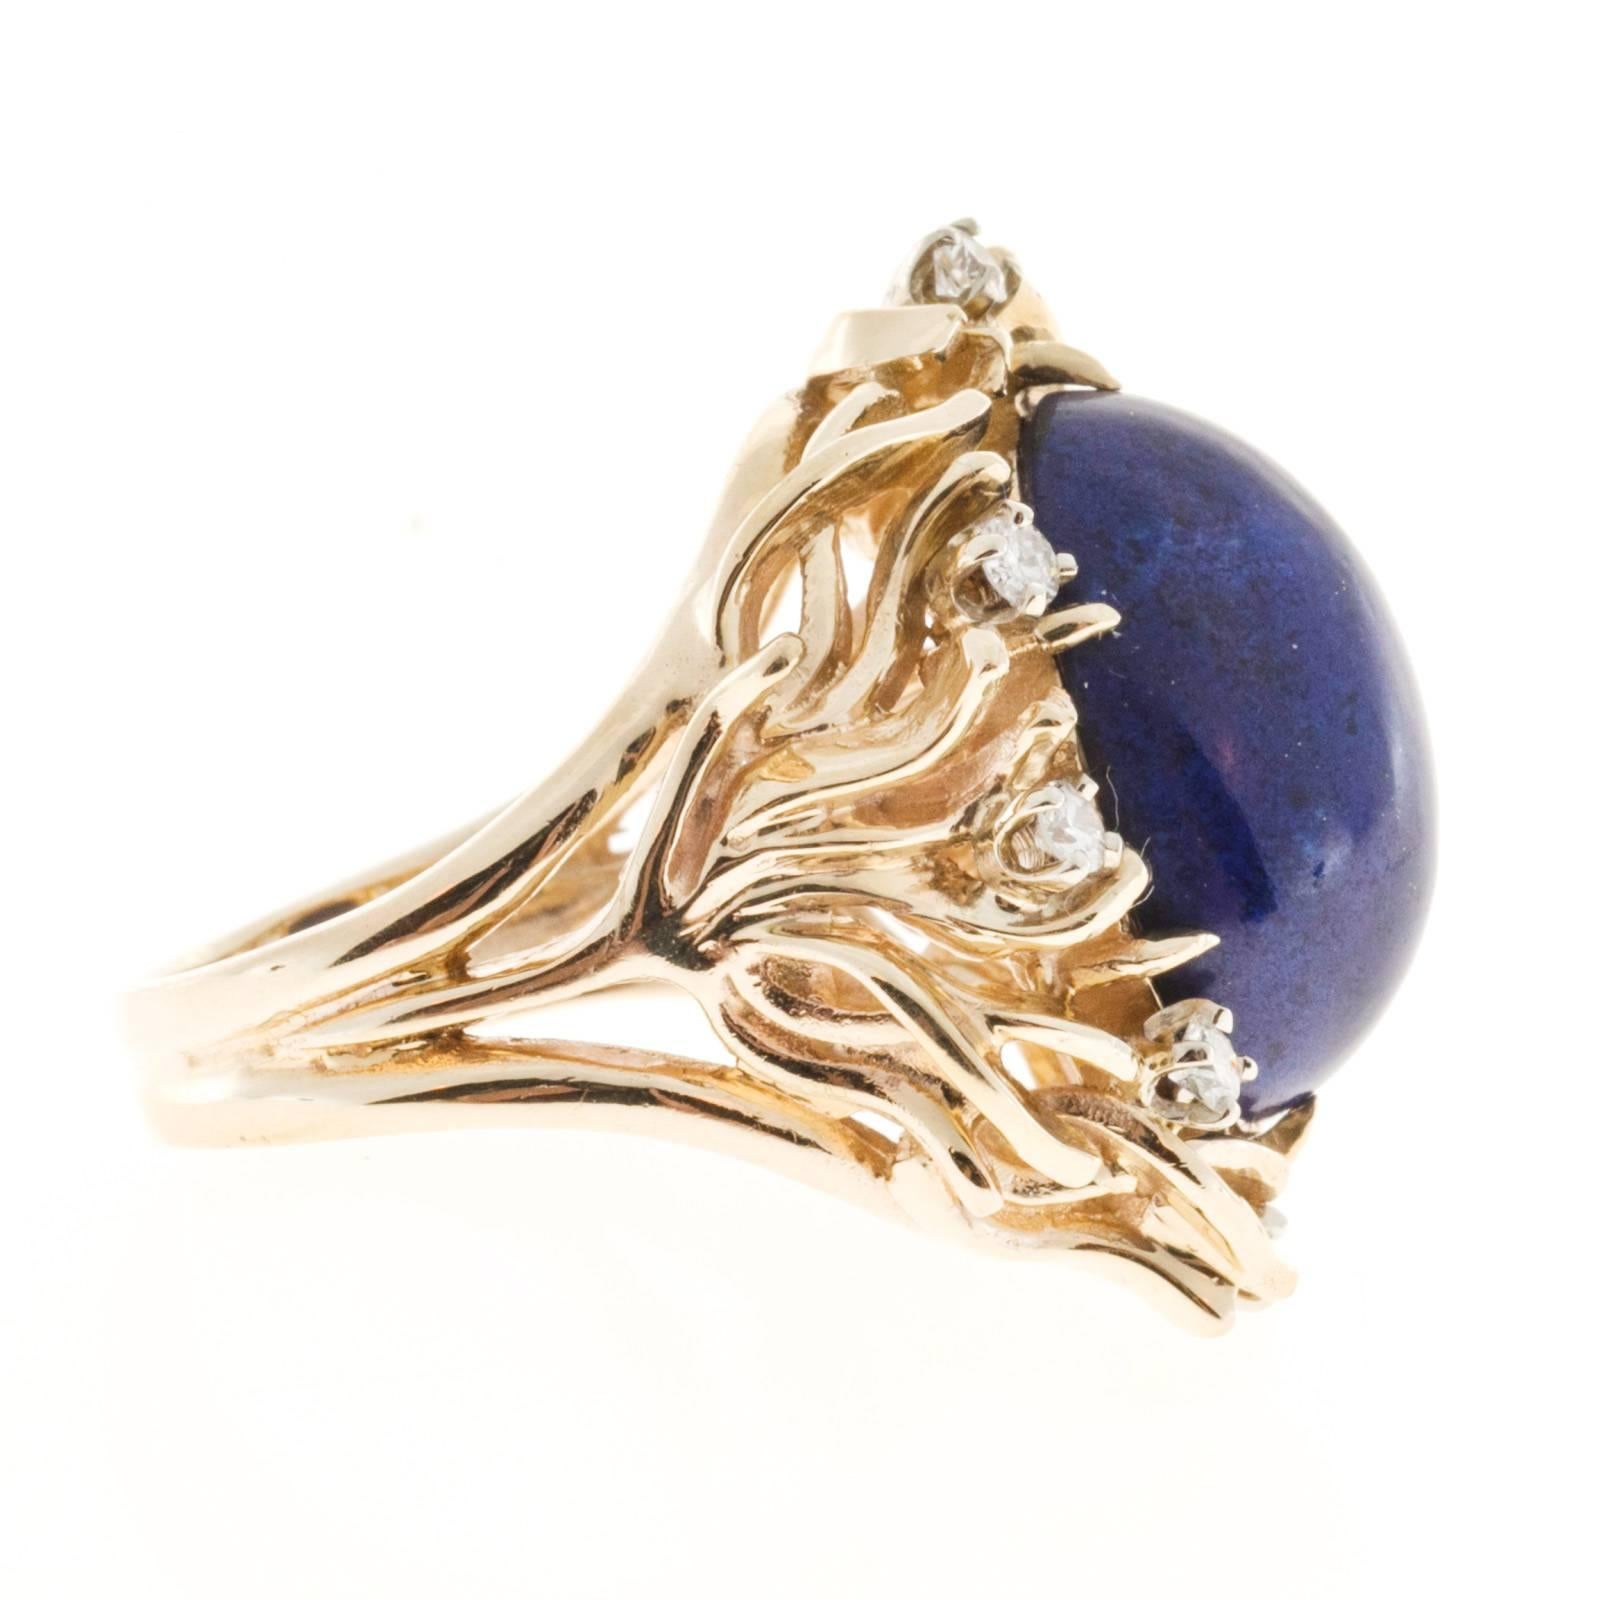 1950’s open work solid 14k yellow gold ring with high grade full cut diamonds surrounding a bright well-polished rare certified violet blue Lapis with no enhancements. Top gem color.

1 oval violet blue cabochon Lapis, 18.02 x 12.94 x 7.22mm,